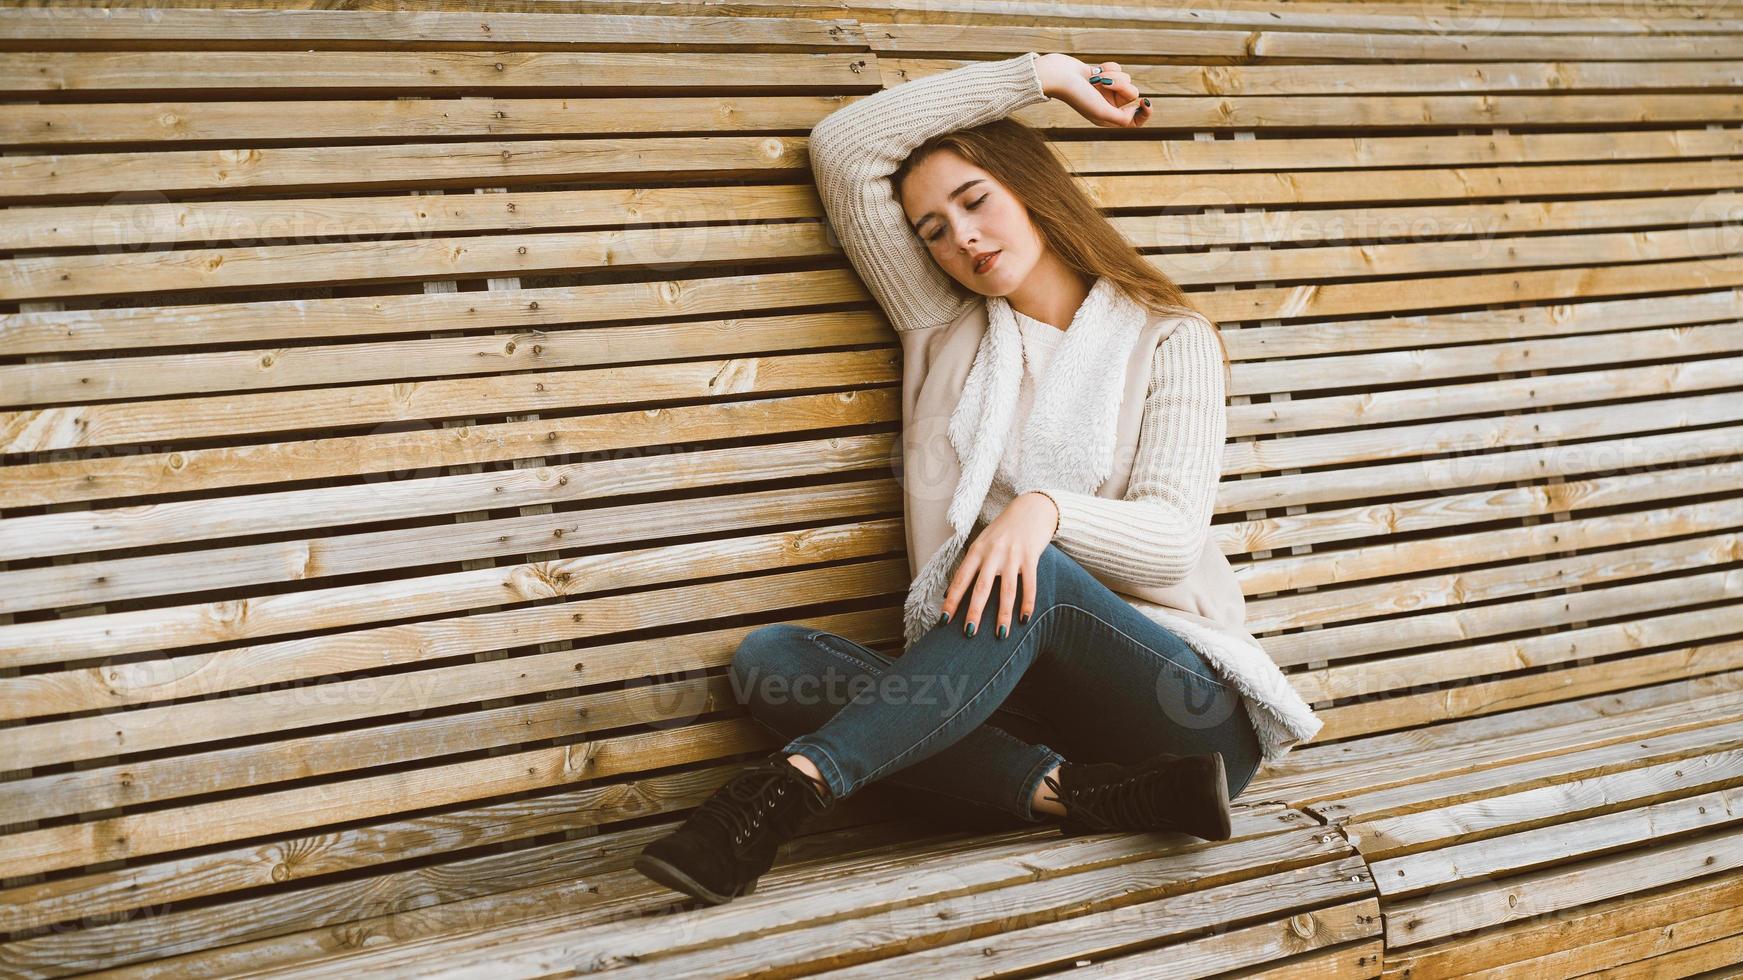 Beautiful young girl with long brown hair sits on wooden bench made of planks and rests, relaxes and reflects. Outdoor photo shoot with attractive woman in winter or autumn